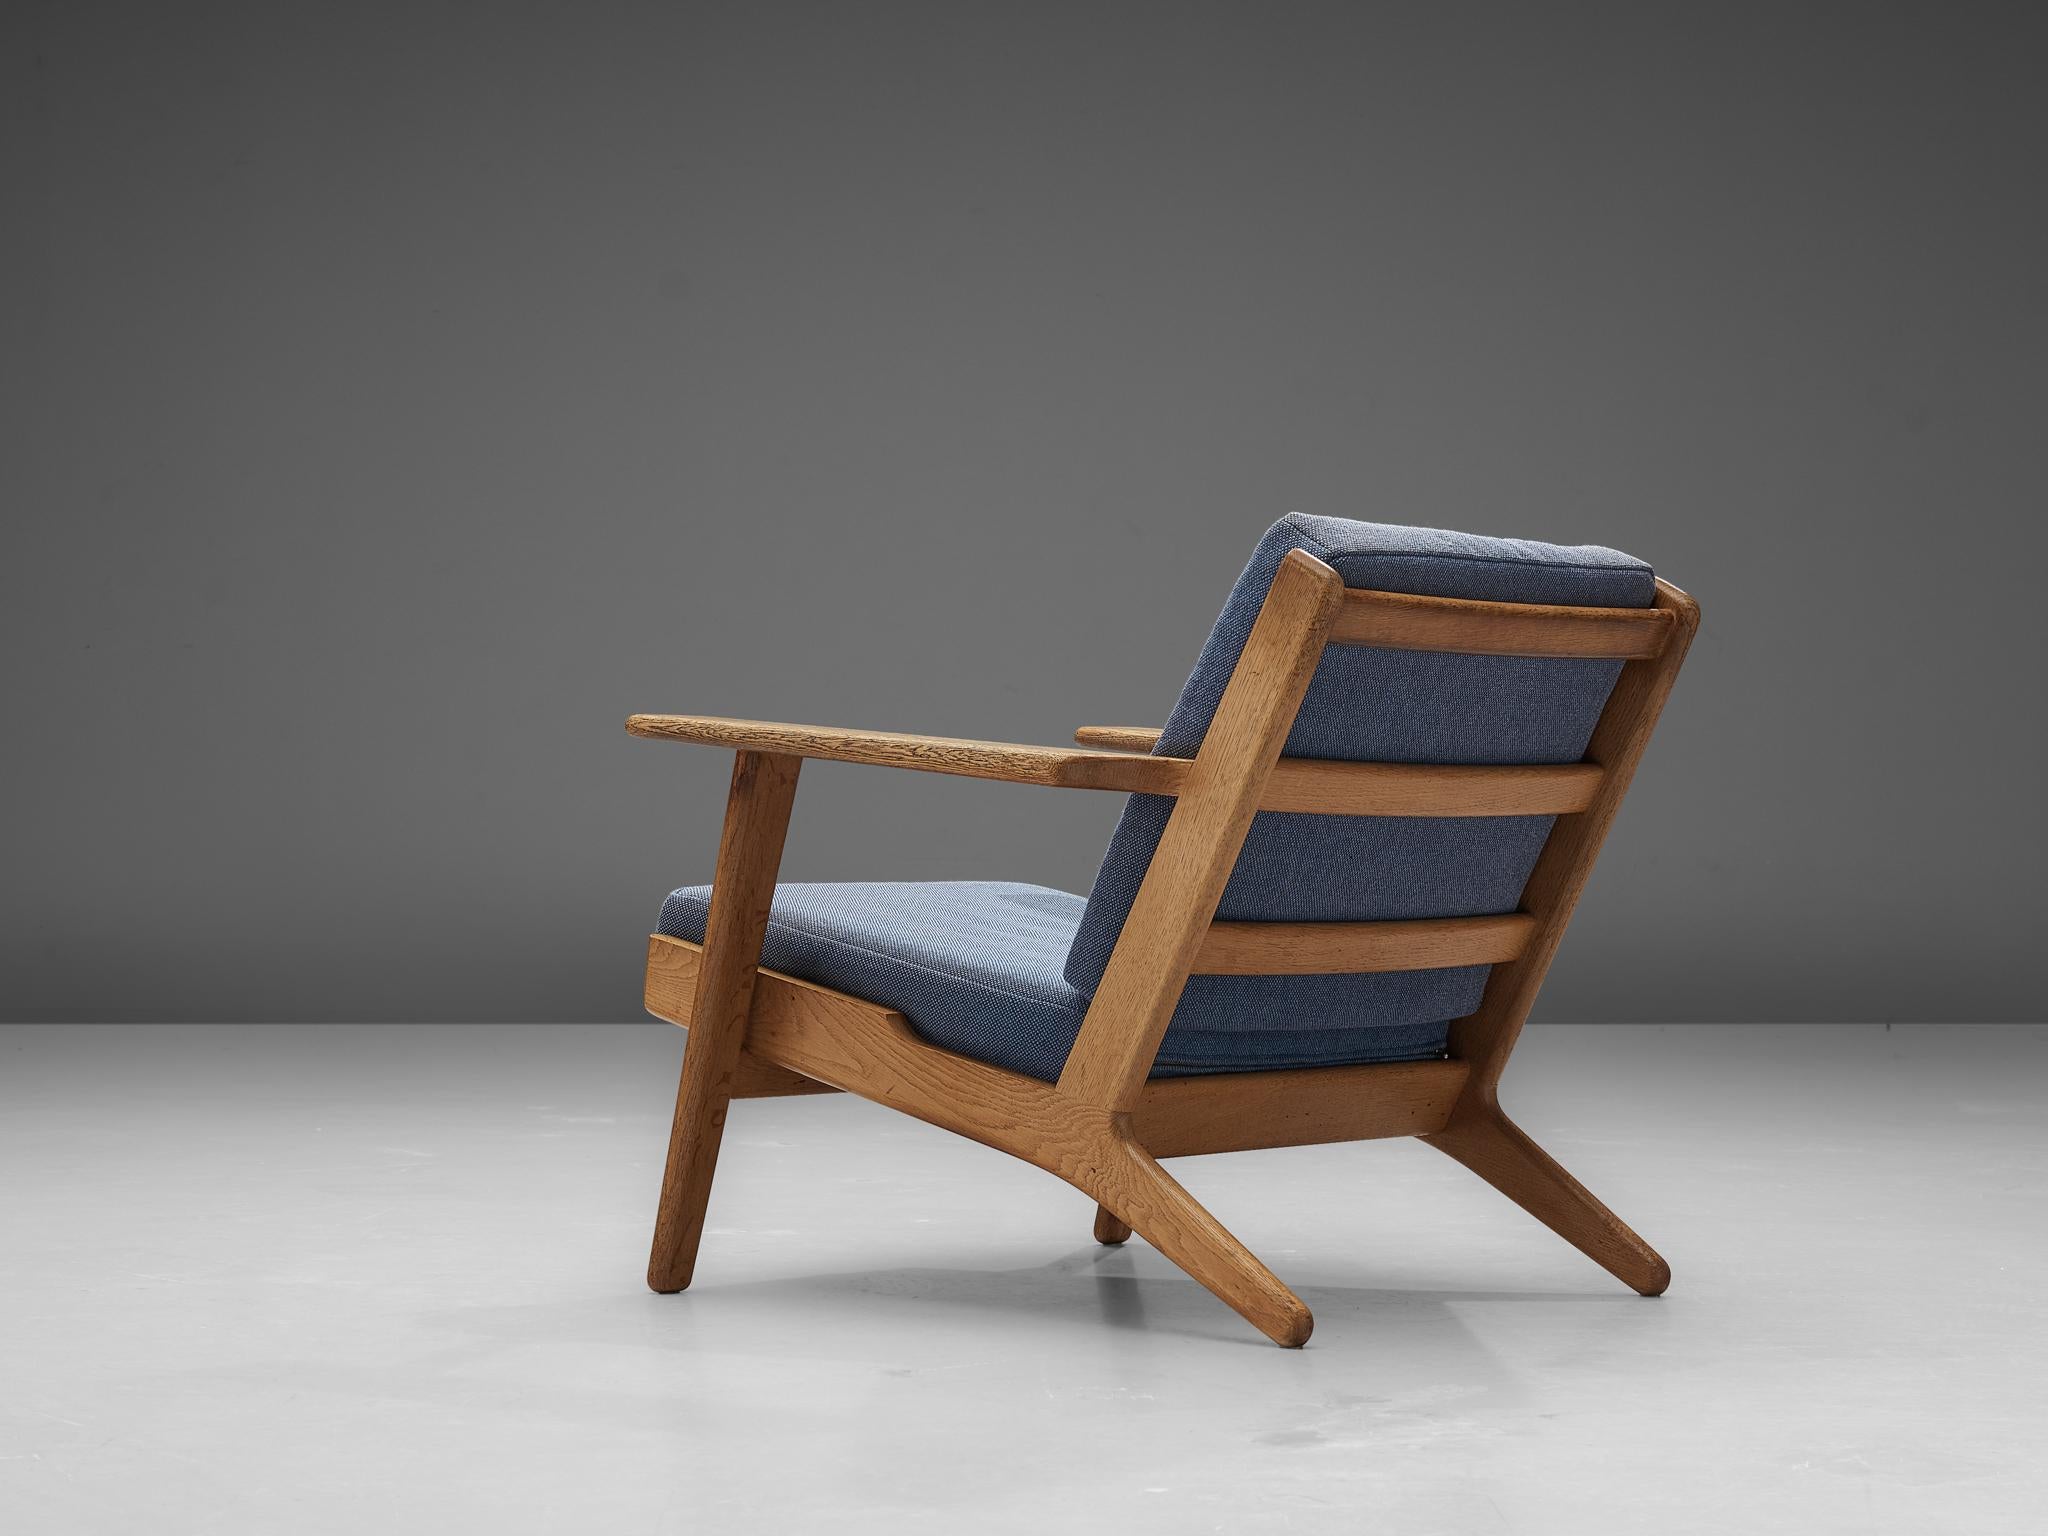 Hans J. Wegner, lounge chair GE290B for GETAMA, oak, upholstery, Denmark, design 1953

Hans J. Wegner designed the GE290B with an inclined seating and backrest which created a comfortable lounge chair. Besides loose cushions increase the comfort.